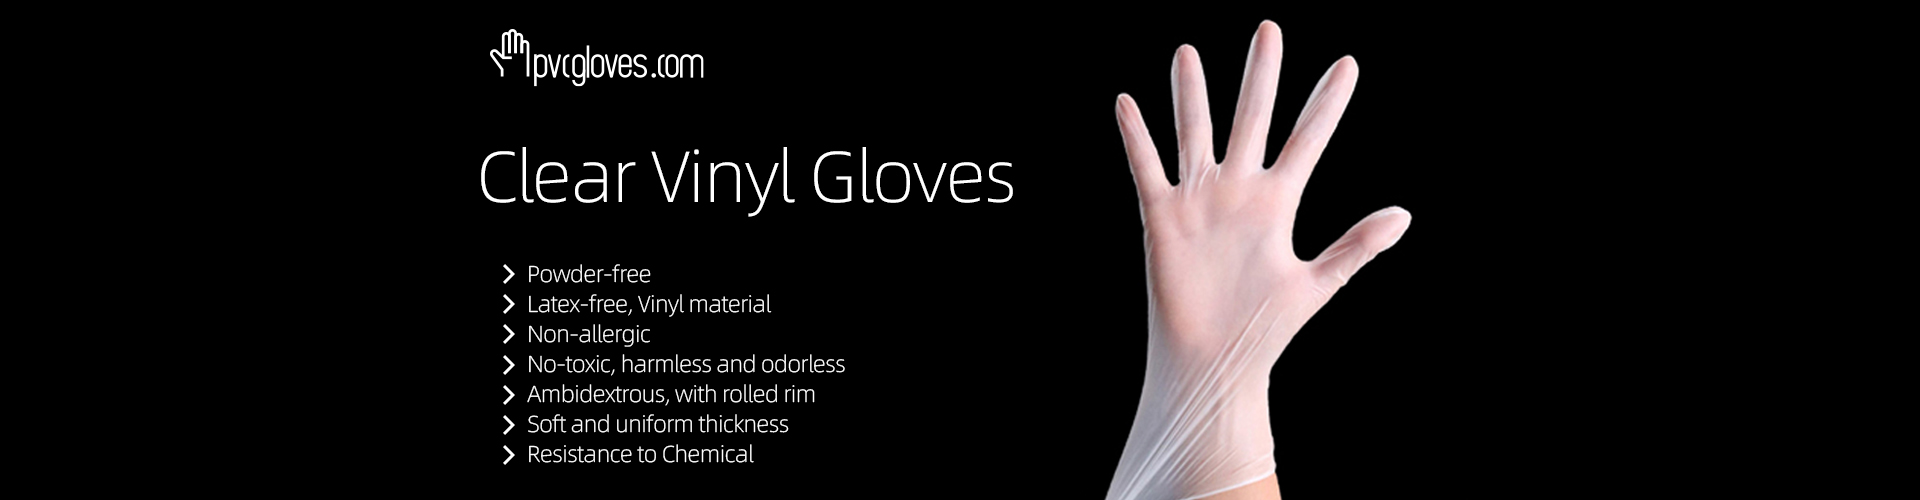 banner-cleargloves